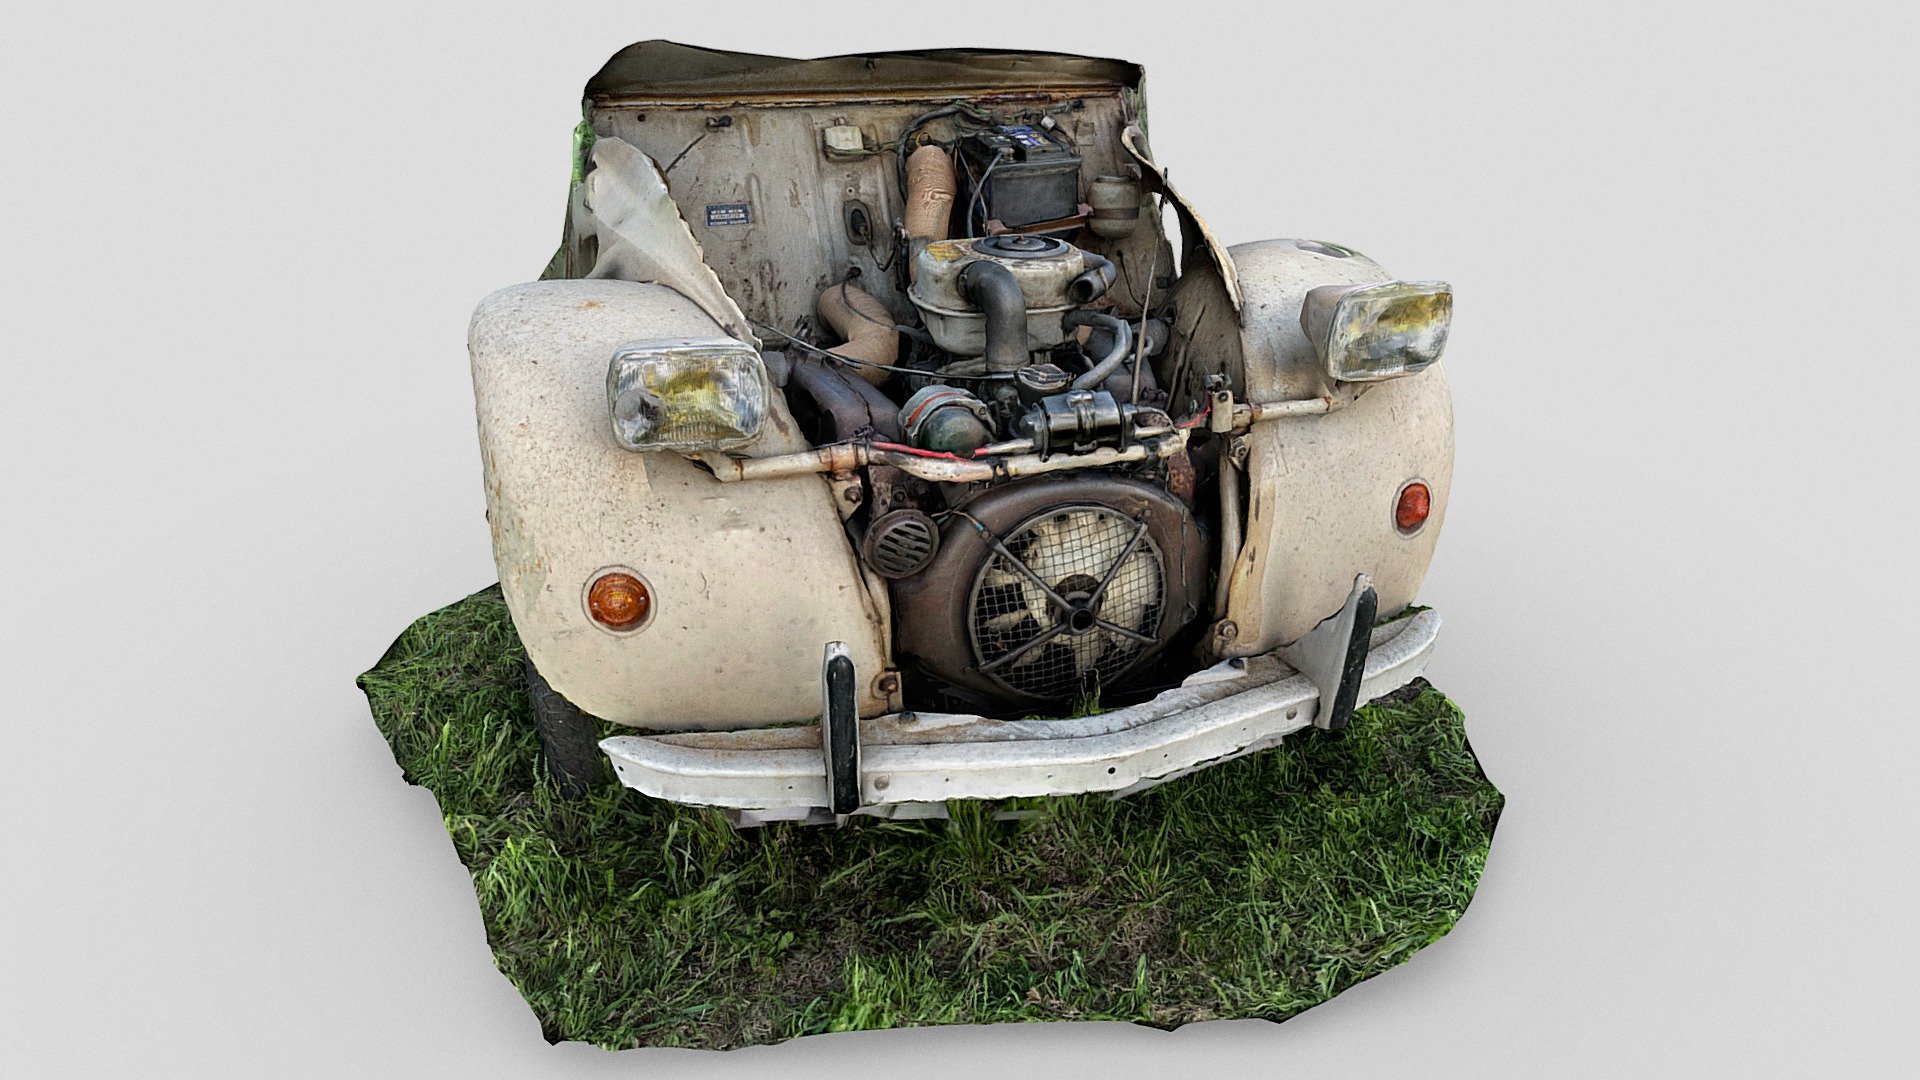 Probably the easiest car engine to mount/repair/maintain.



Scanned with the iPhone12 Pro and Photogramtree (Object Capture). Please feel free to follow my collections of daily scans (link) as well as my scans in San Francisco, Paris, or in the catacombs (link). Follow me on Twitter - Citroen 2CV engine - Download Free 3D model by Emm (@edemaistre) 3d model